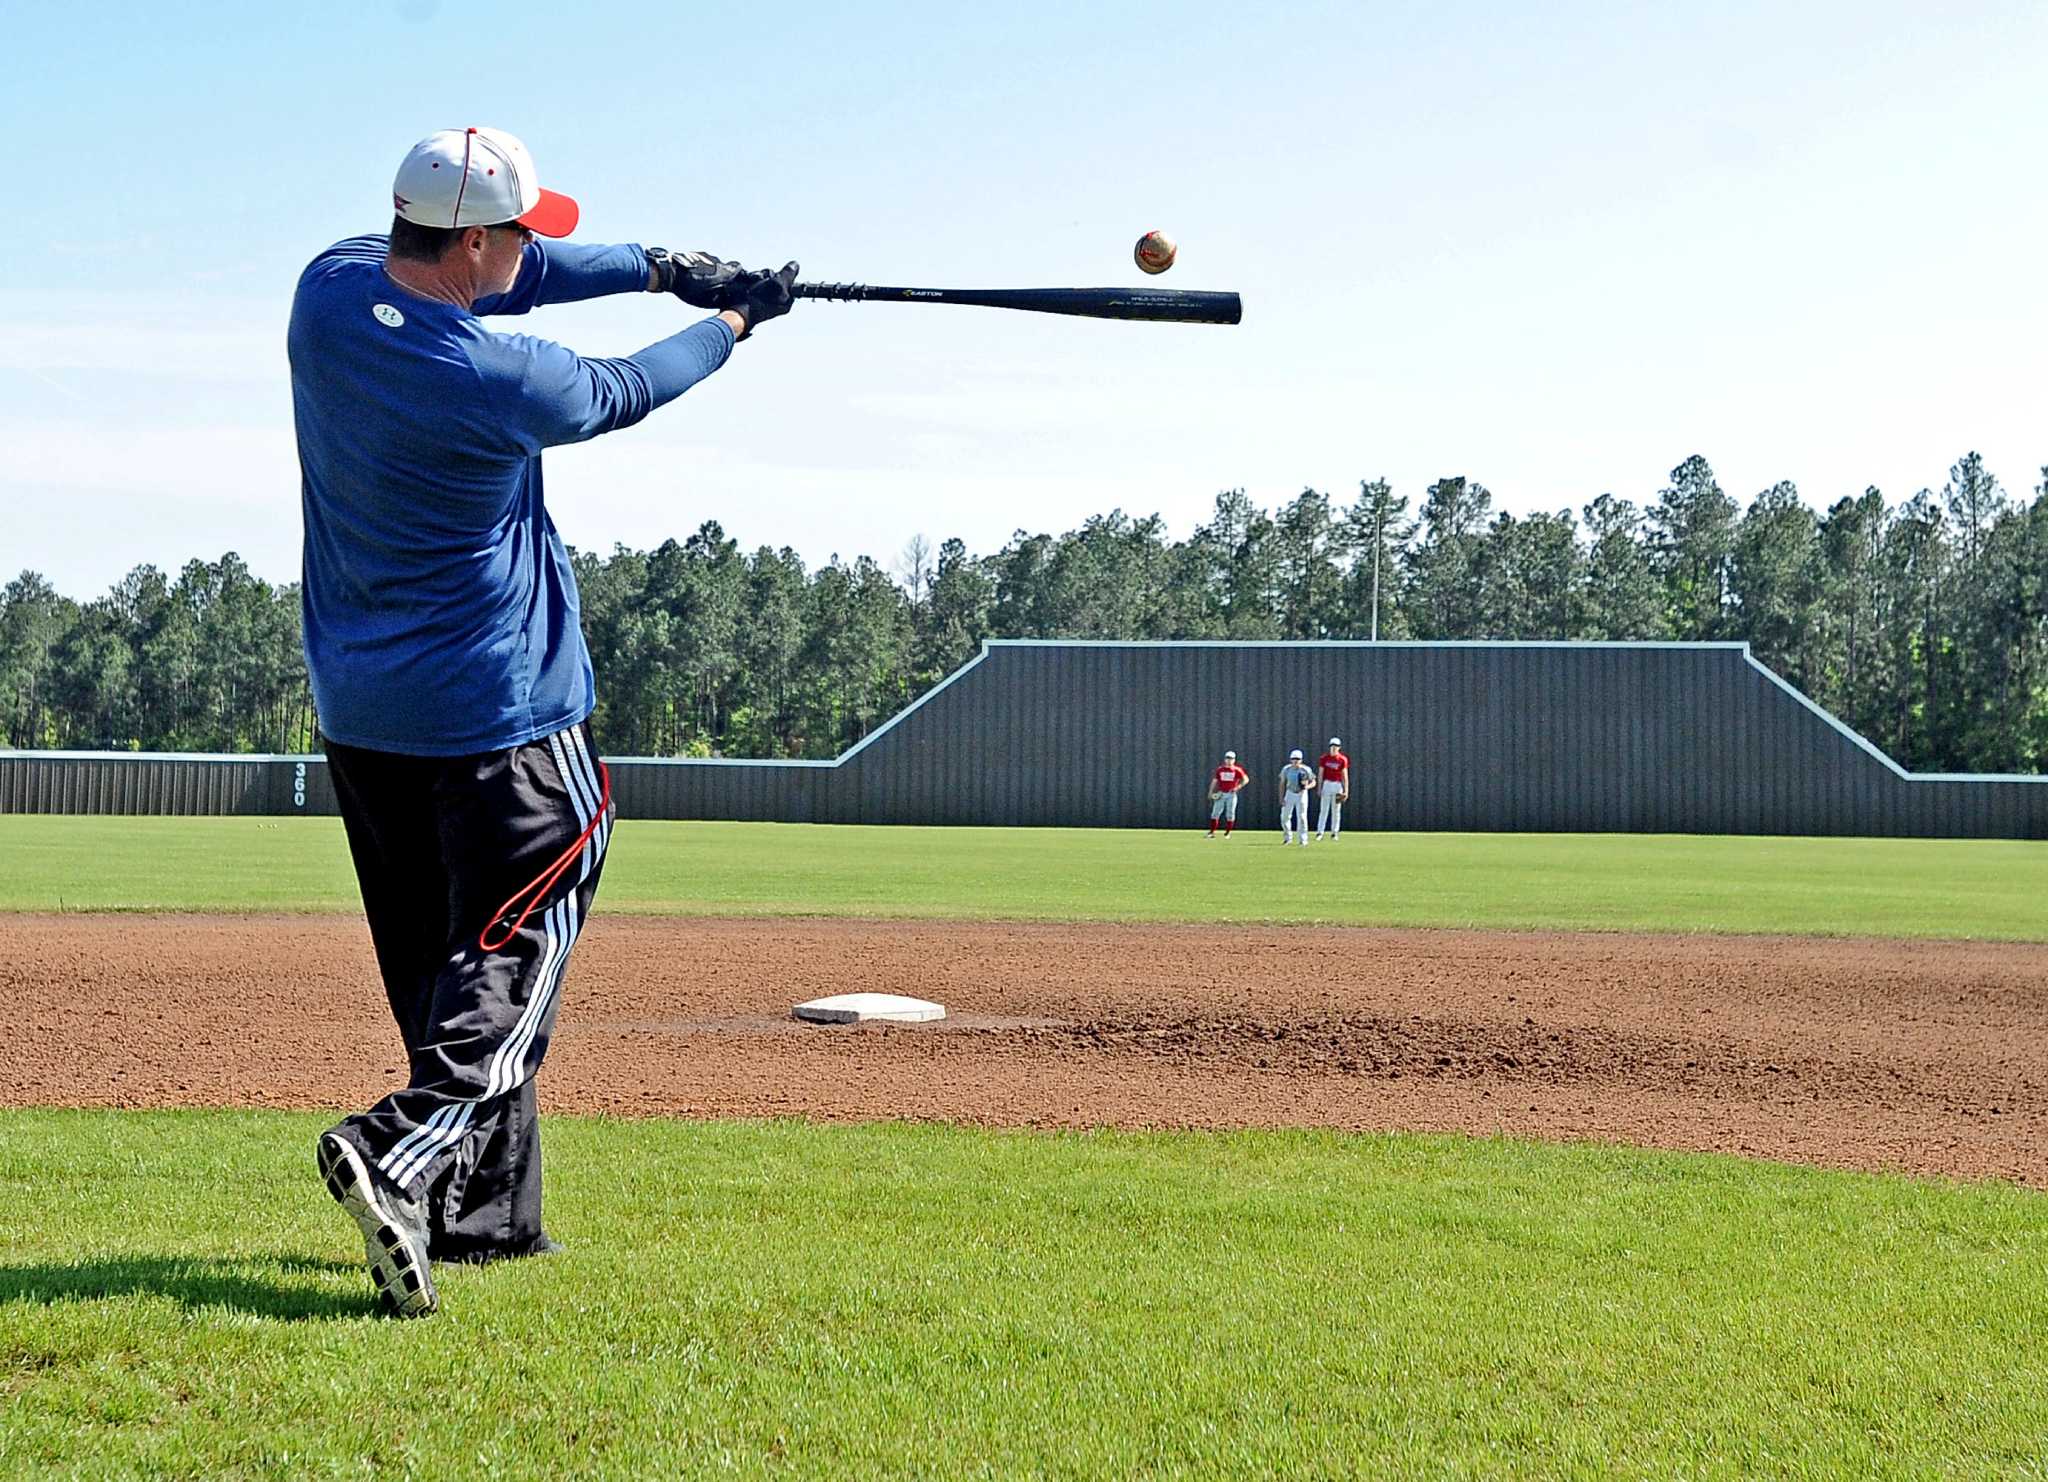 Lumberton in baseball playoffs for first time in a decade - Beaumont Enterprise